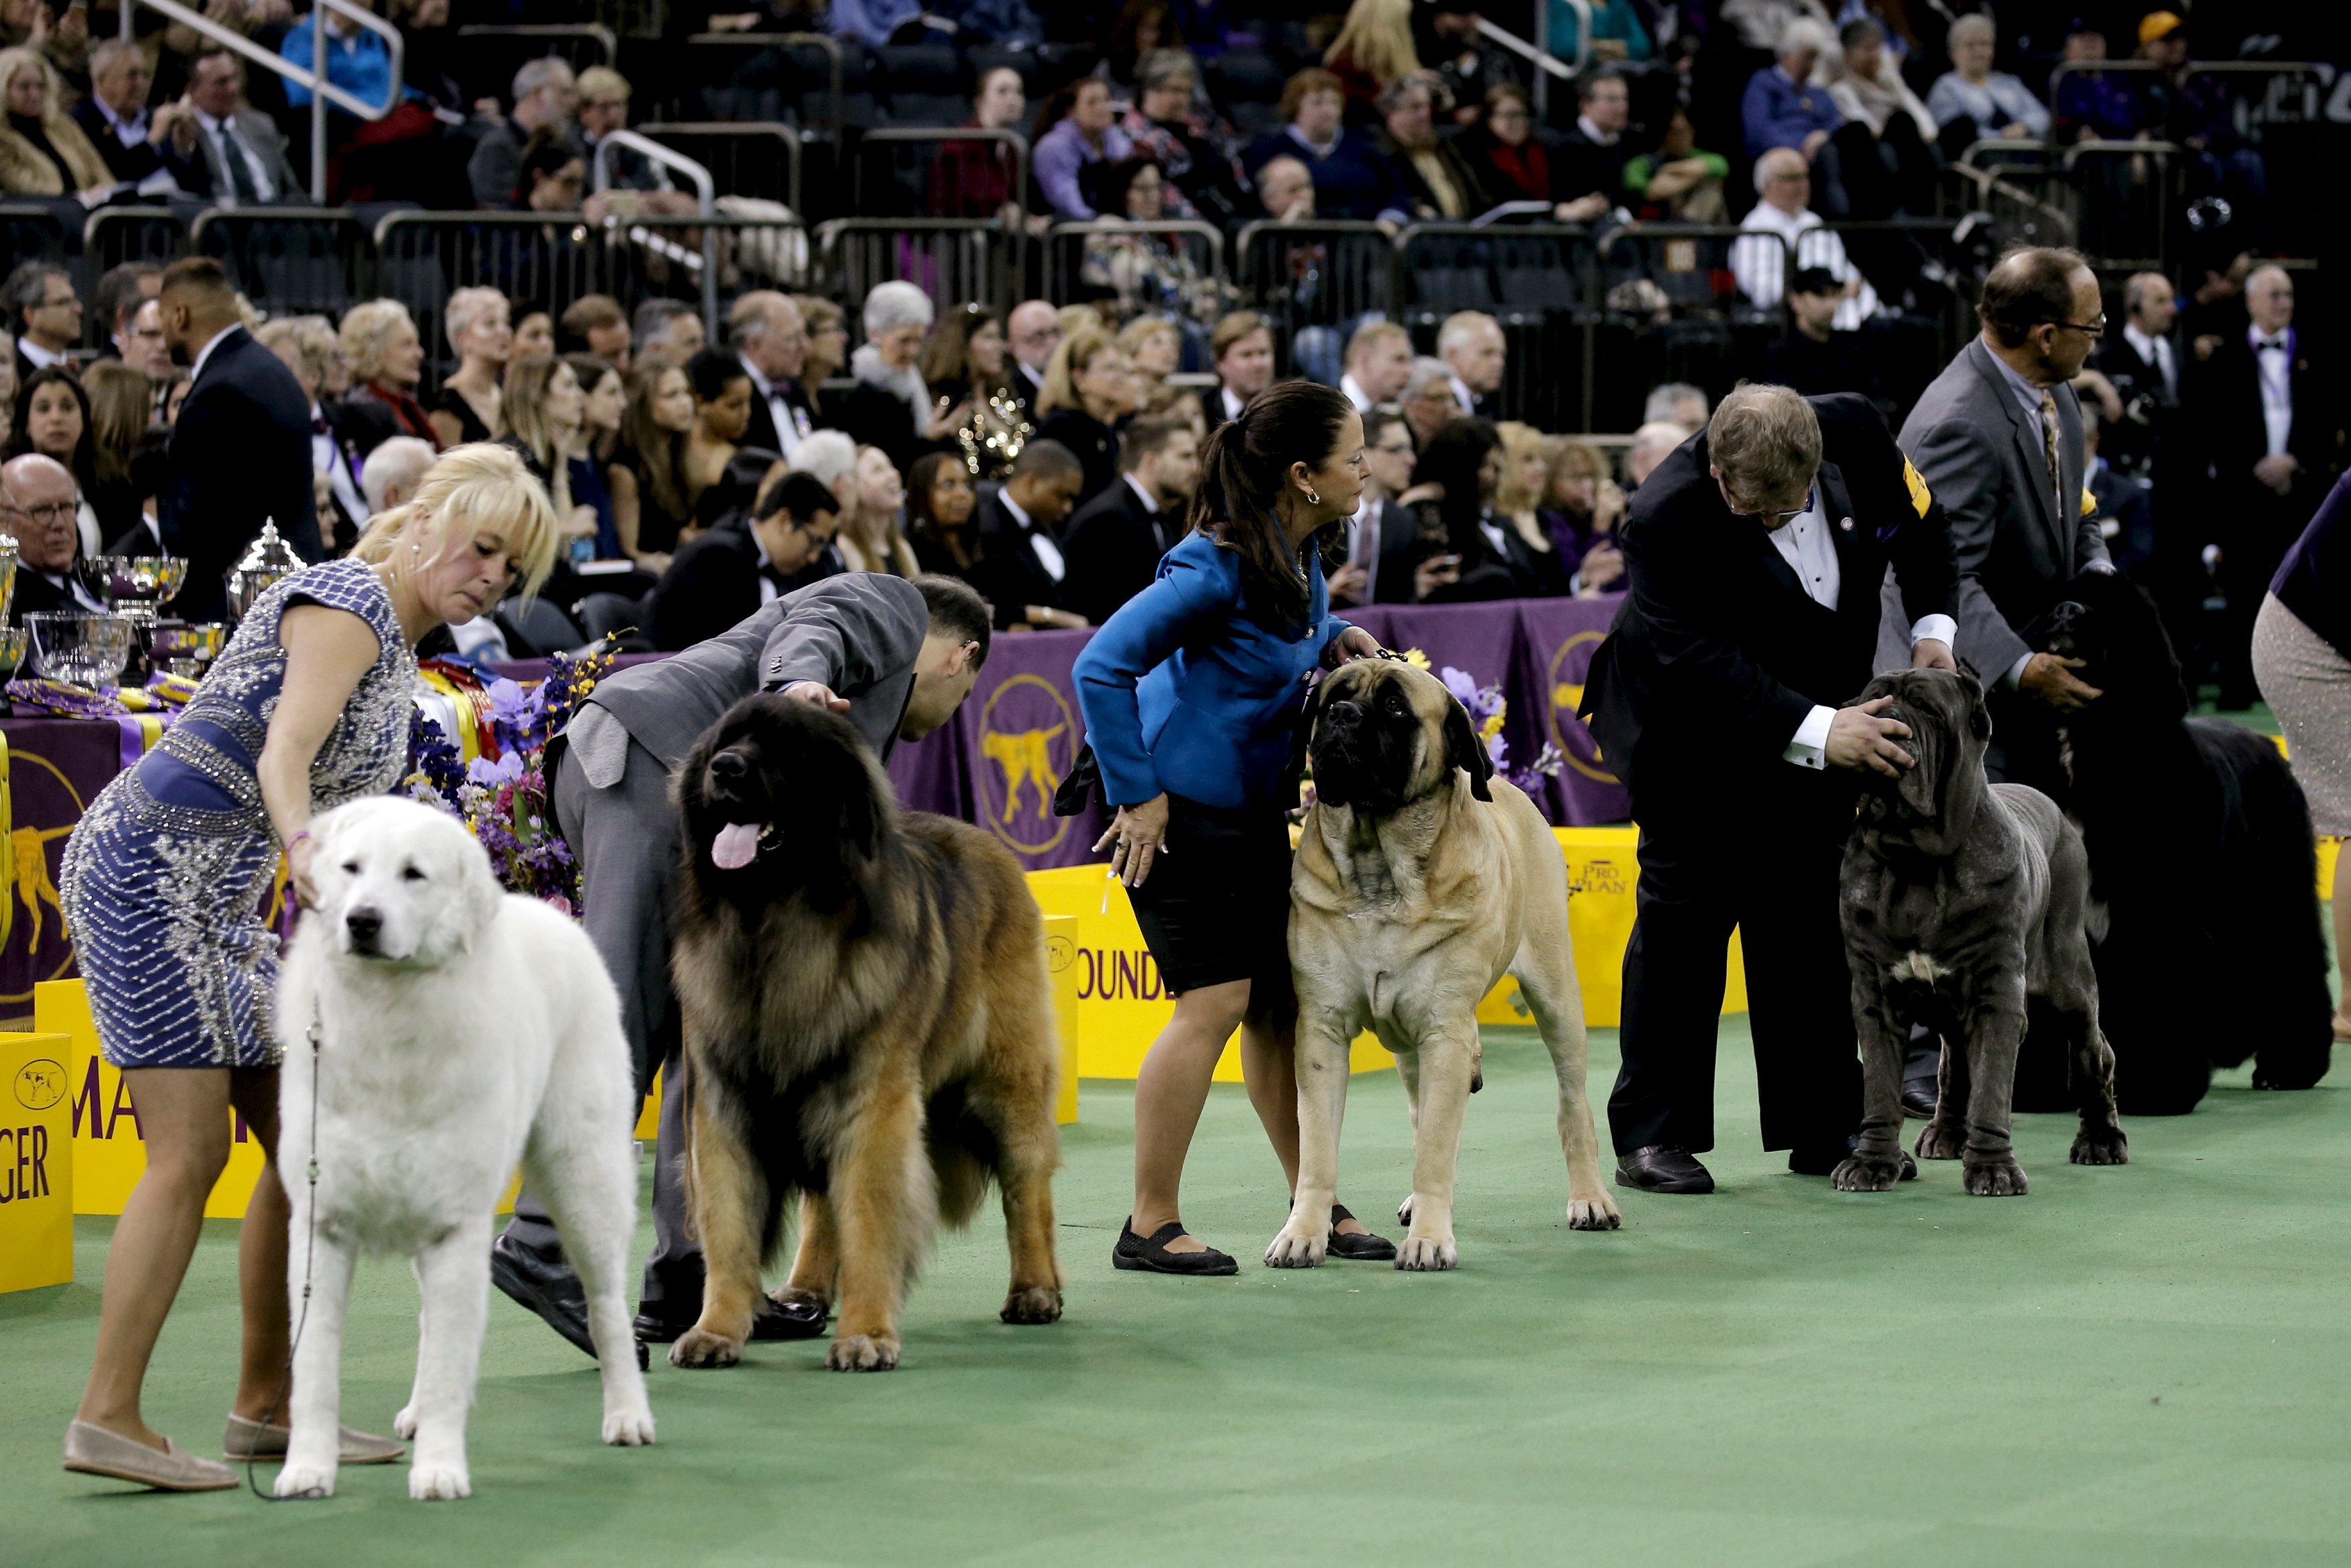 CJ the German shorthaired pointer wins Westminster dog show CBS News